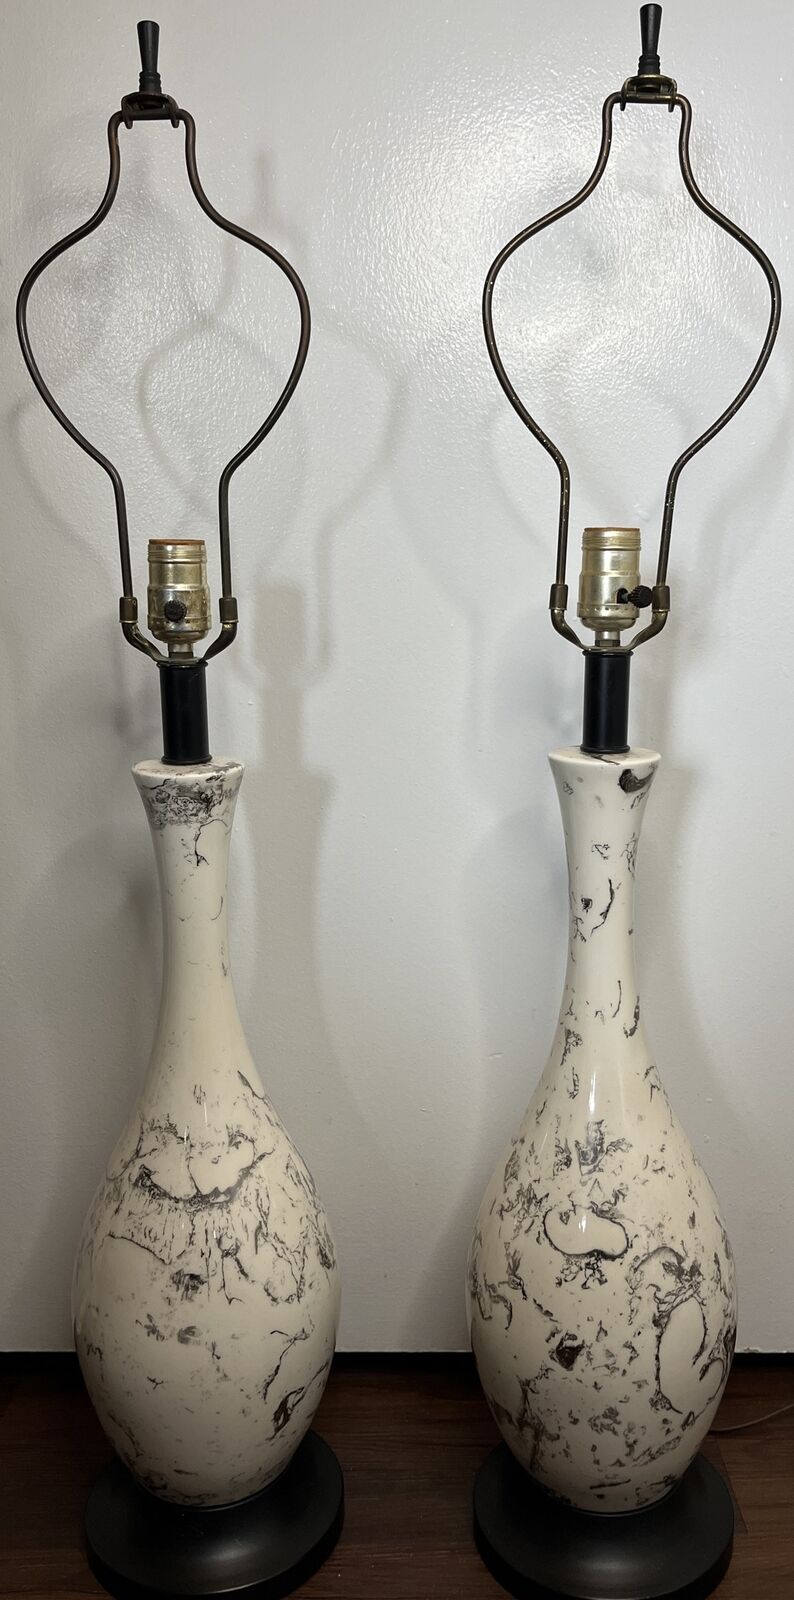 Pair of Vintage Mid-Century Marble-Patterned Glazed Ceramic Table Lamps